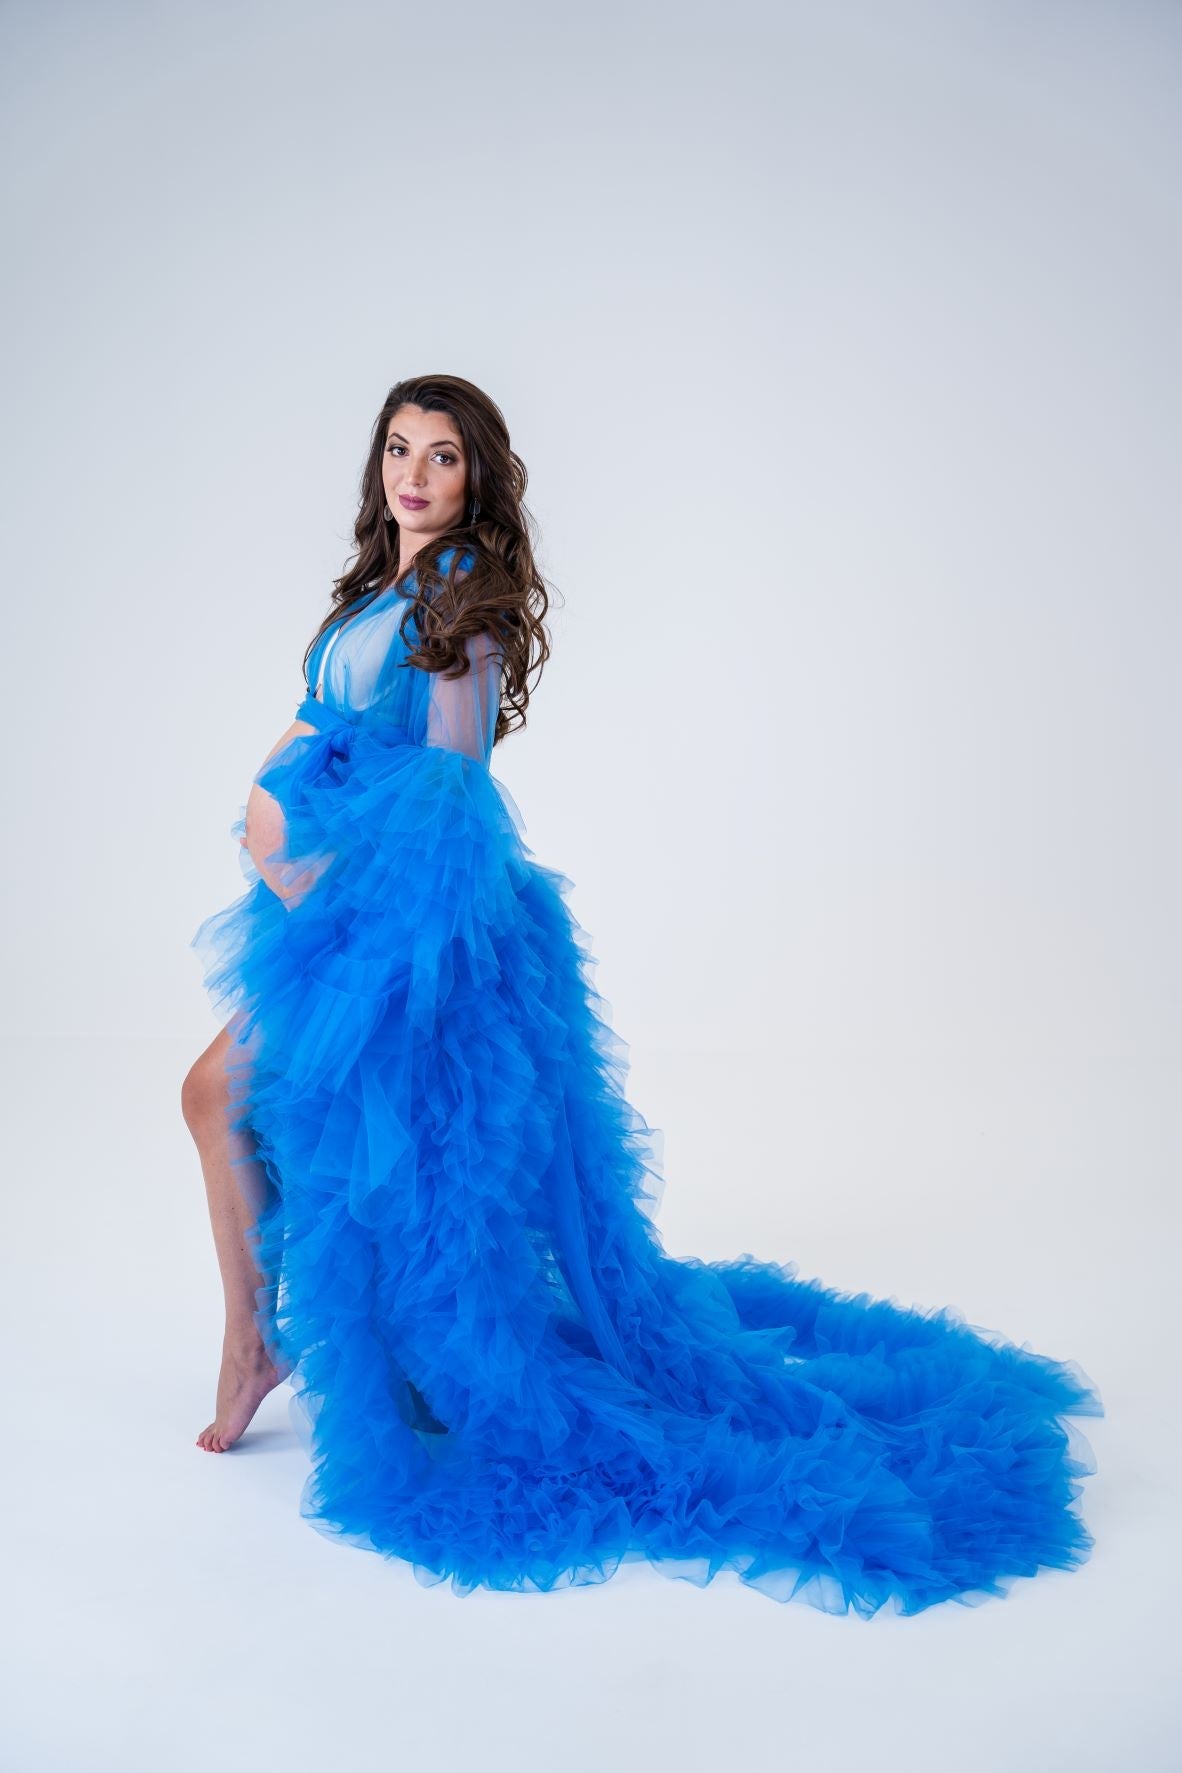 Dress Hire - Maternity Photoshoot Dresses - Sophie - Royal Blue Tulle Robe - 4 DAY RENTAL - Luxe Bumps AU